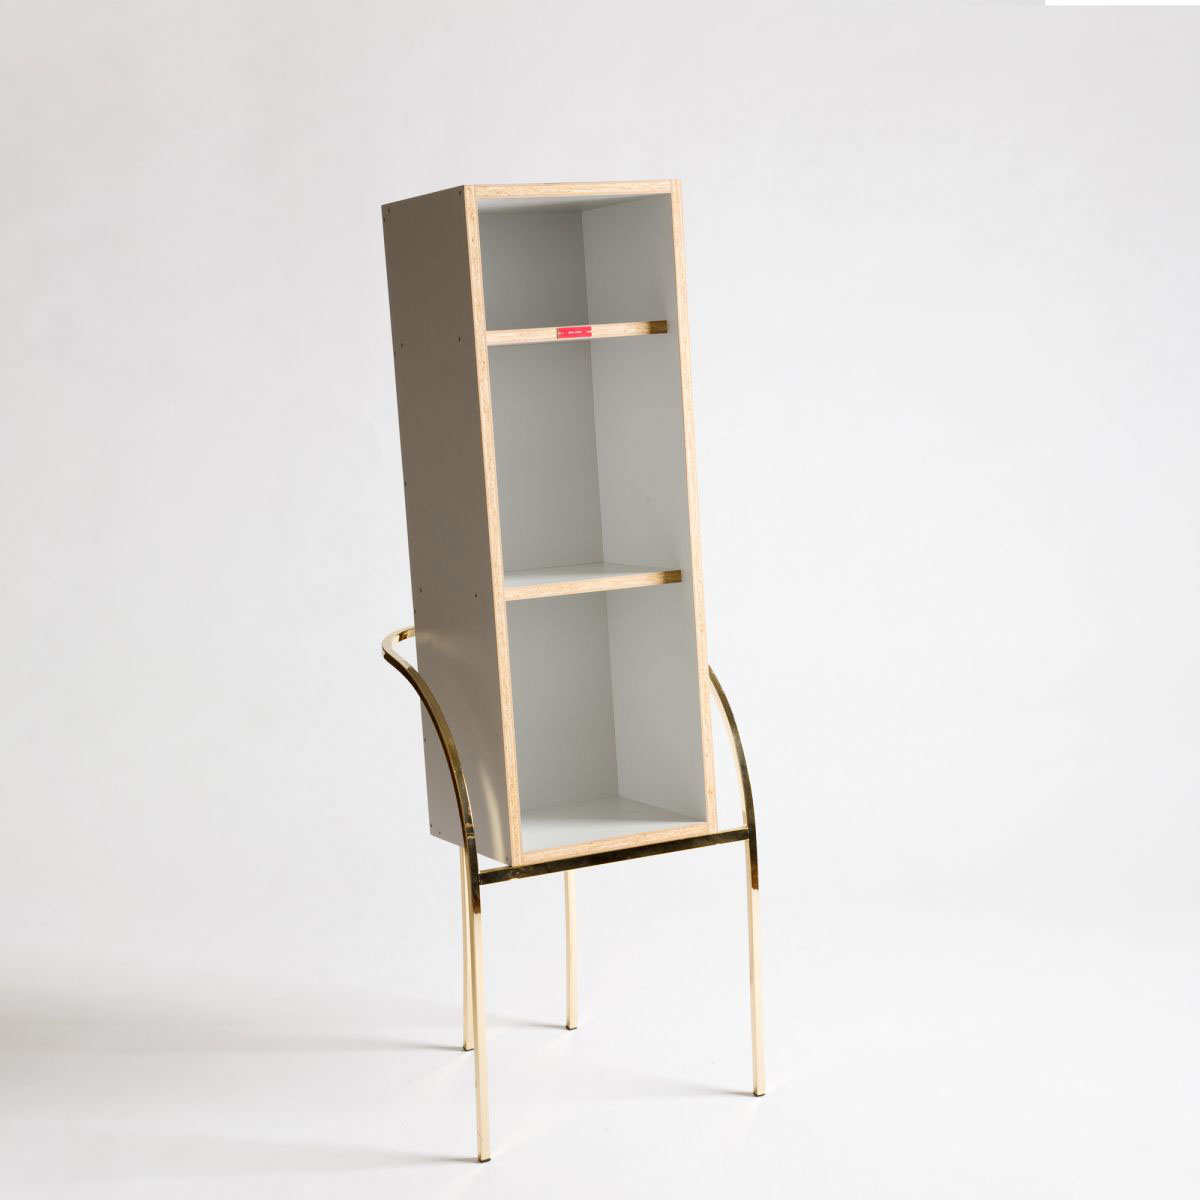 Mobile contenitore 'Somerset House/ Chair Shelf' Martino Gamper pic-1